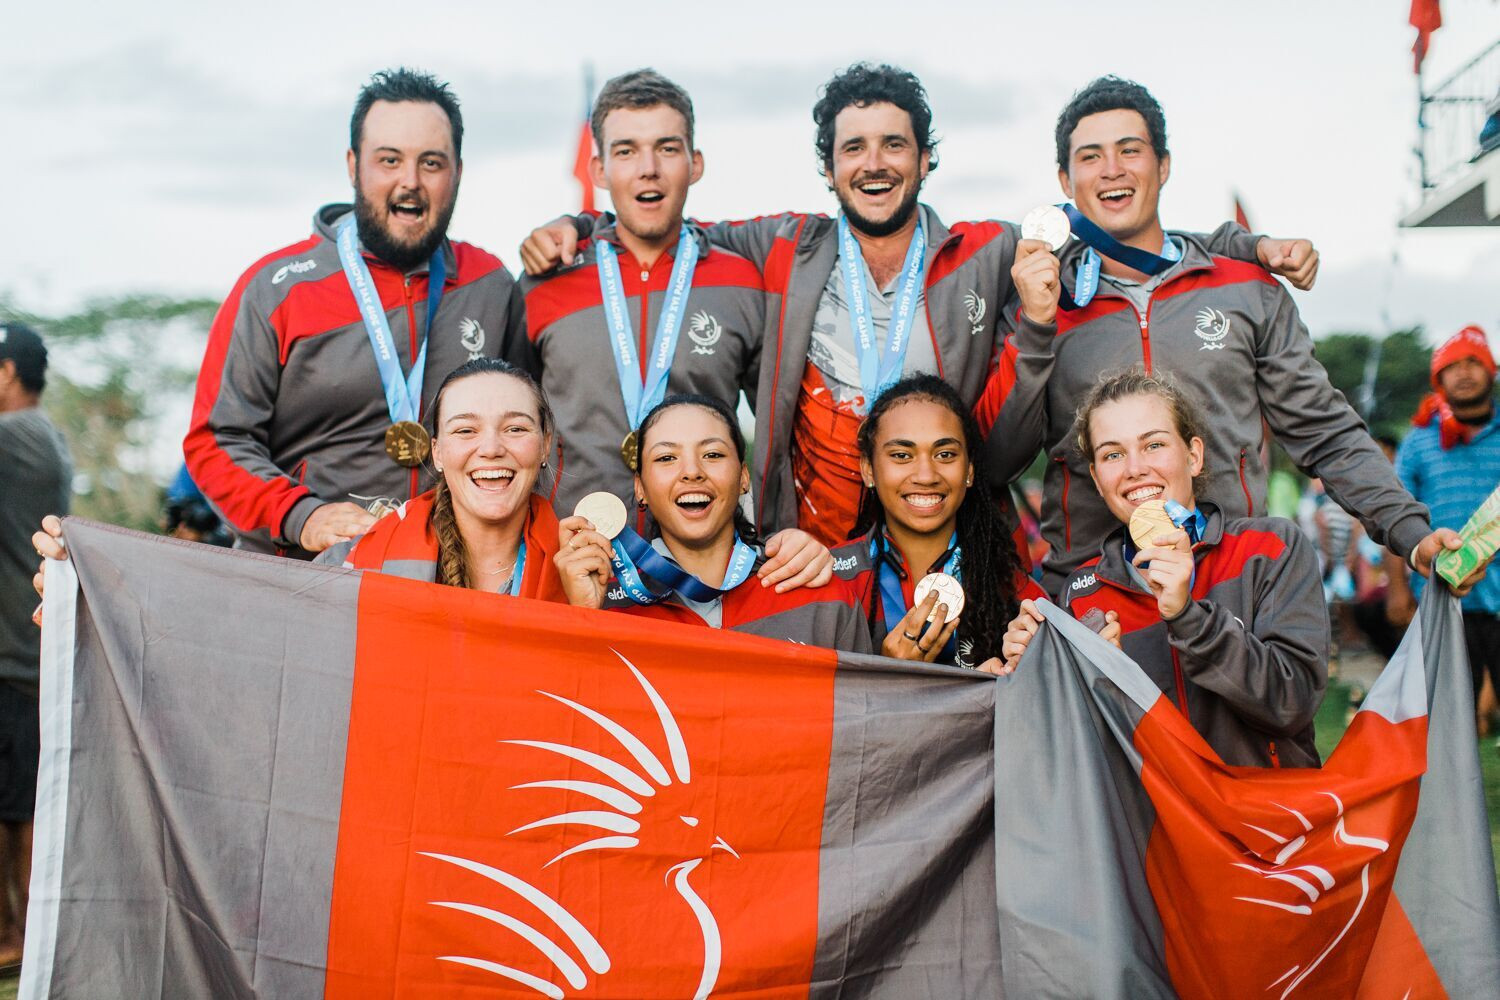 New Caledonia won all four golf golds to tighten their grip on the medal table ©Samoa 2019